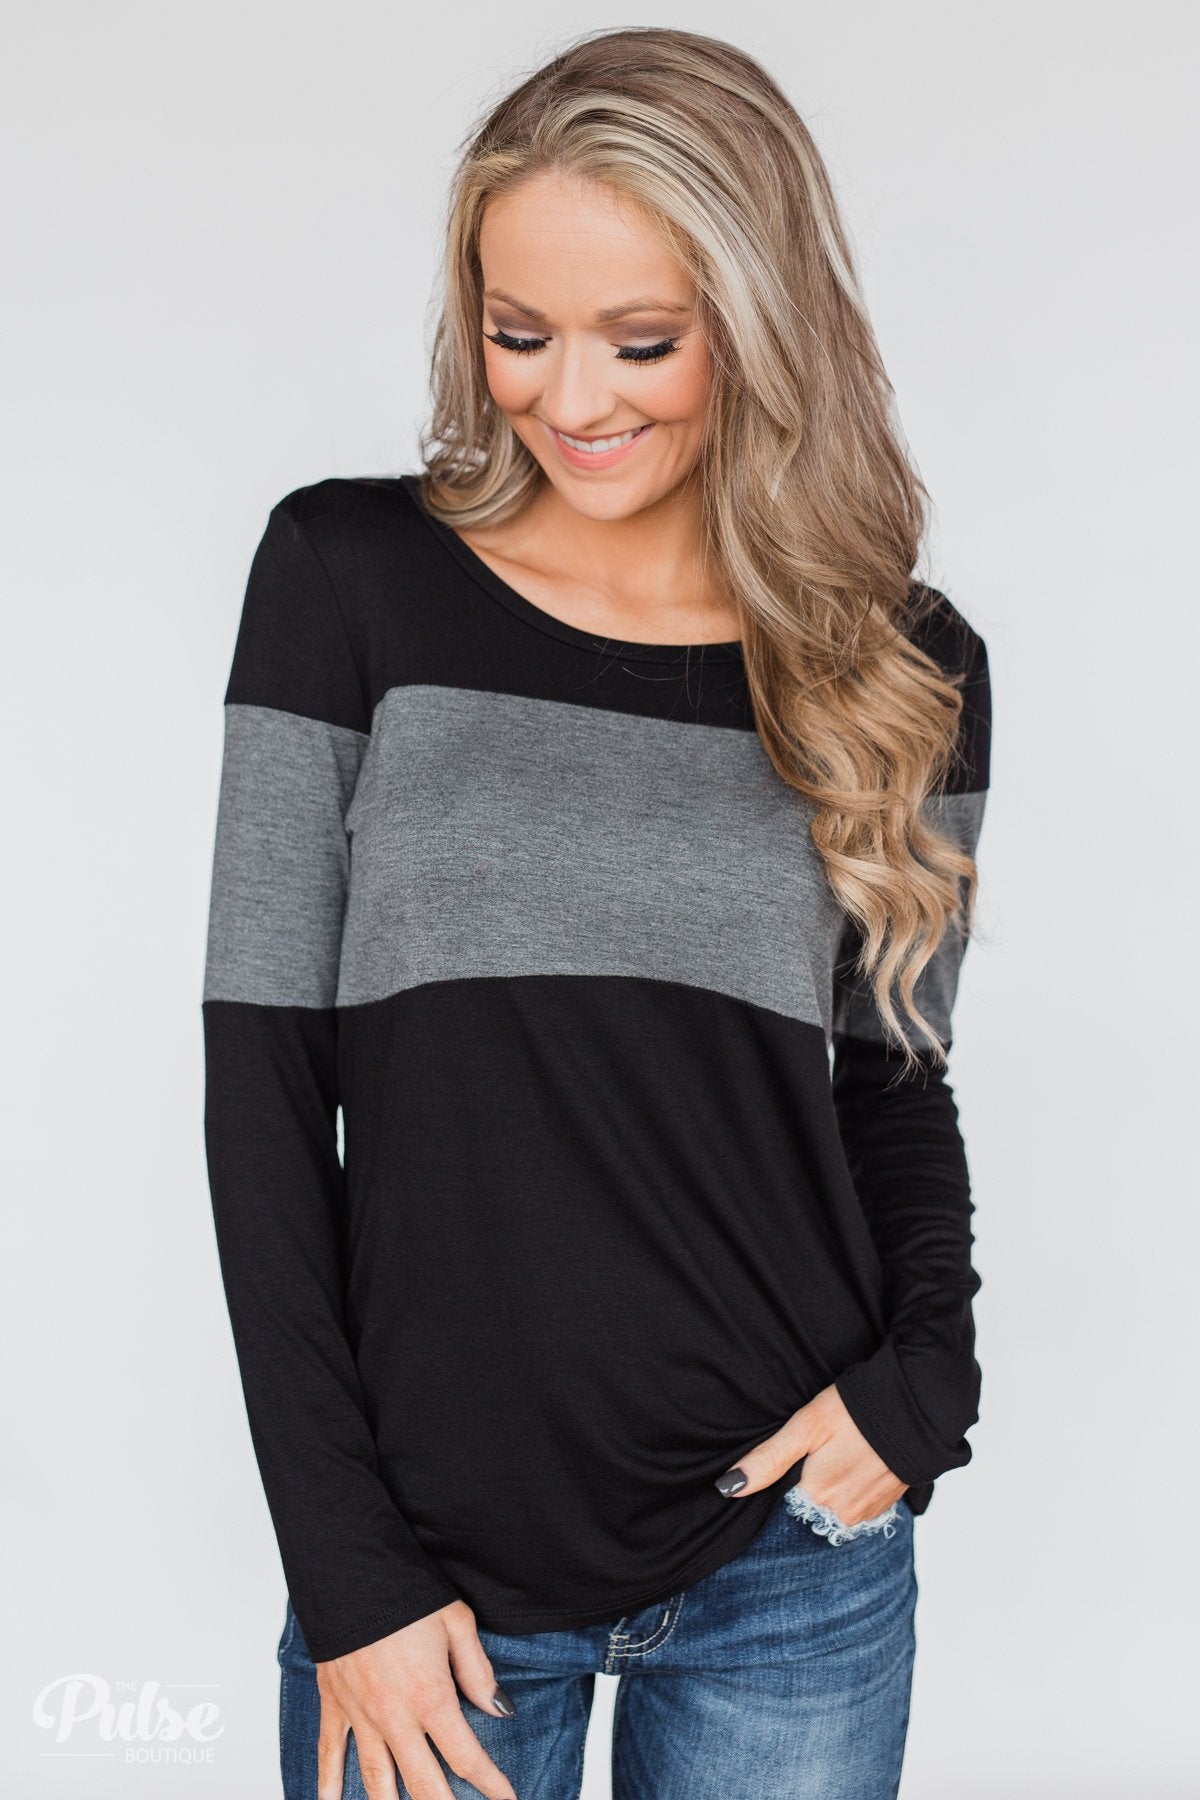 One Way Ticket Color Block Top- Black & Charcoal – The Pulse Boutique